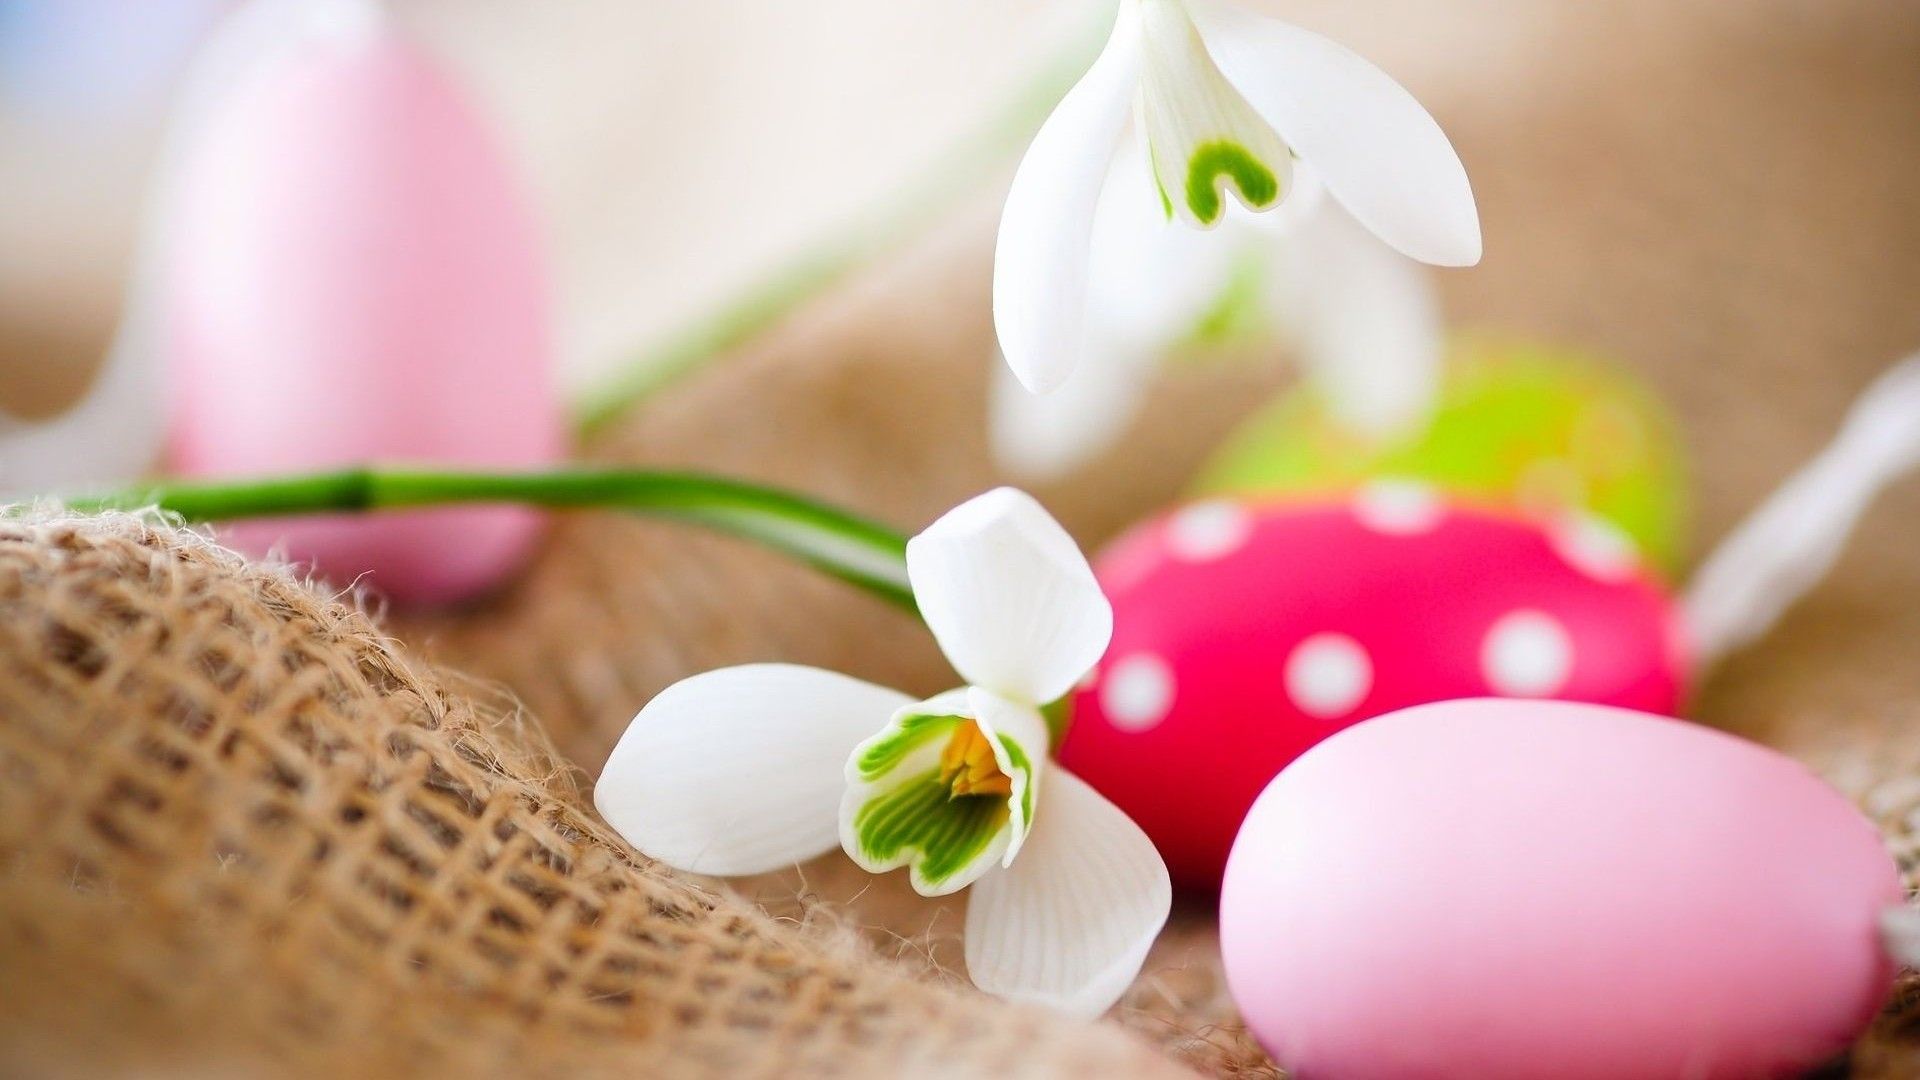 A collection of 25 Easter HD Wallpaper to get you in the Easter